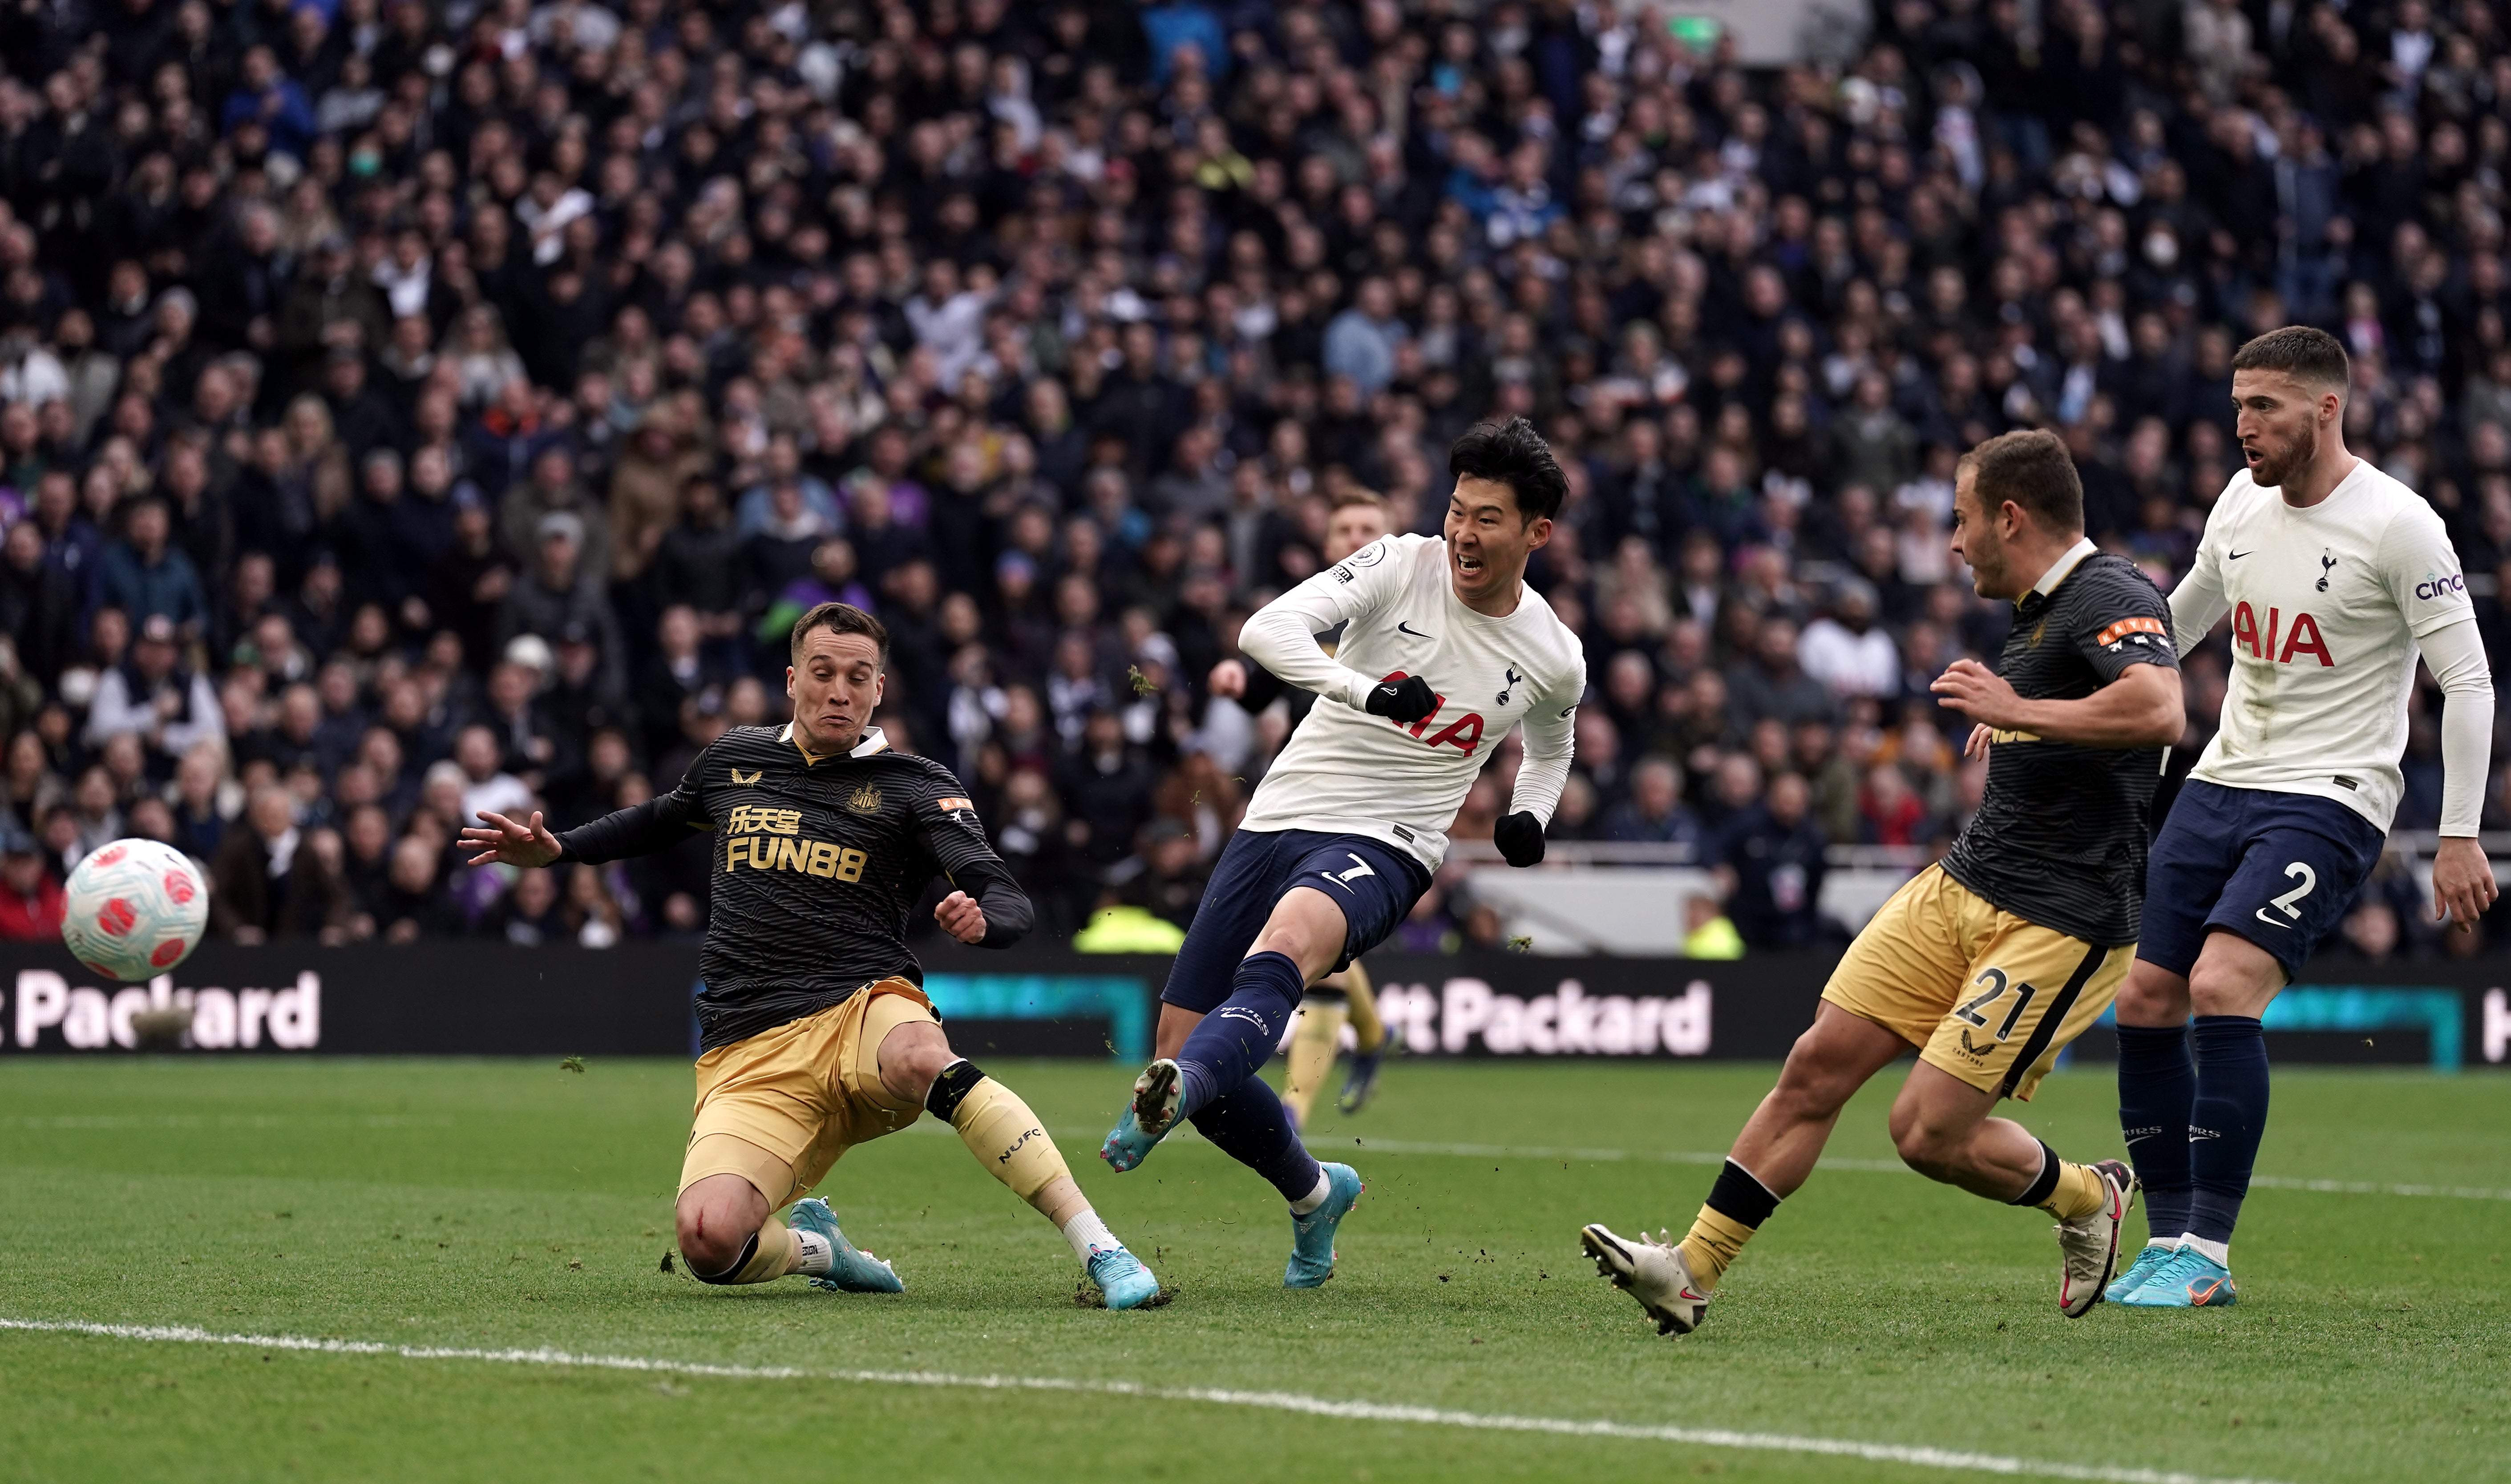 Son Heung-min scores during Tottenham’s 5-1 thrashing of Newcastle that moved them into the top four ahead of Arsenal, with Manchester United three points back in seventh (Nick Potts/PA)